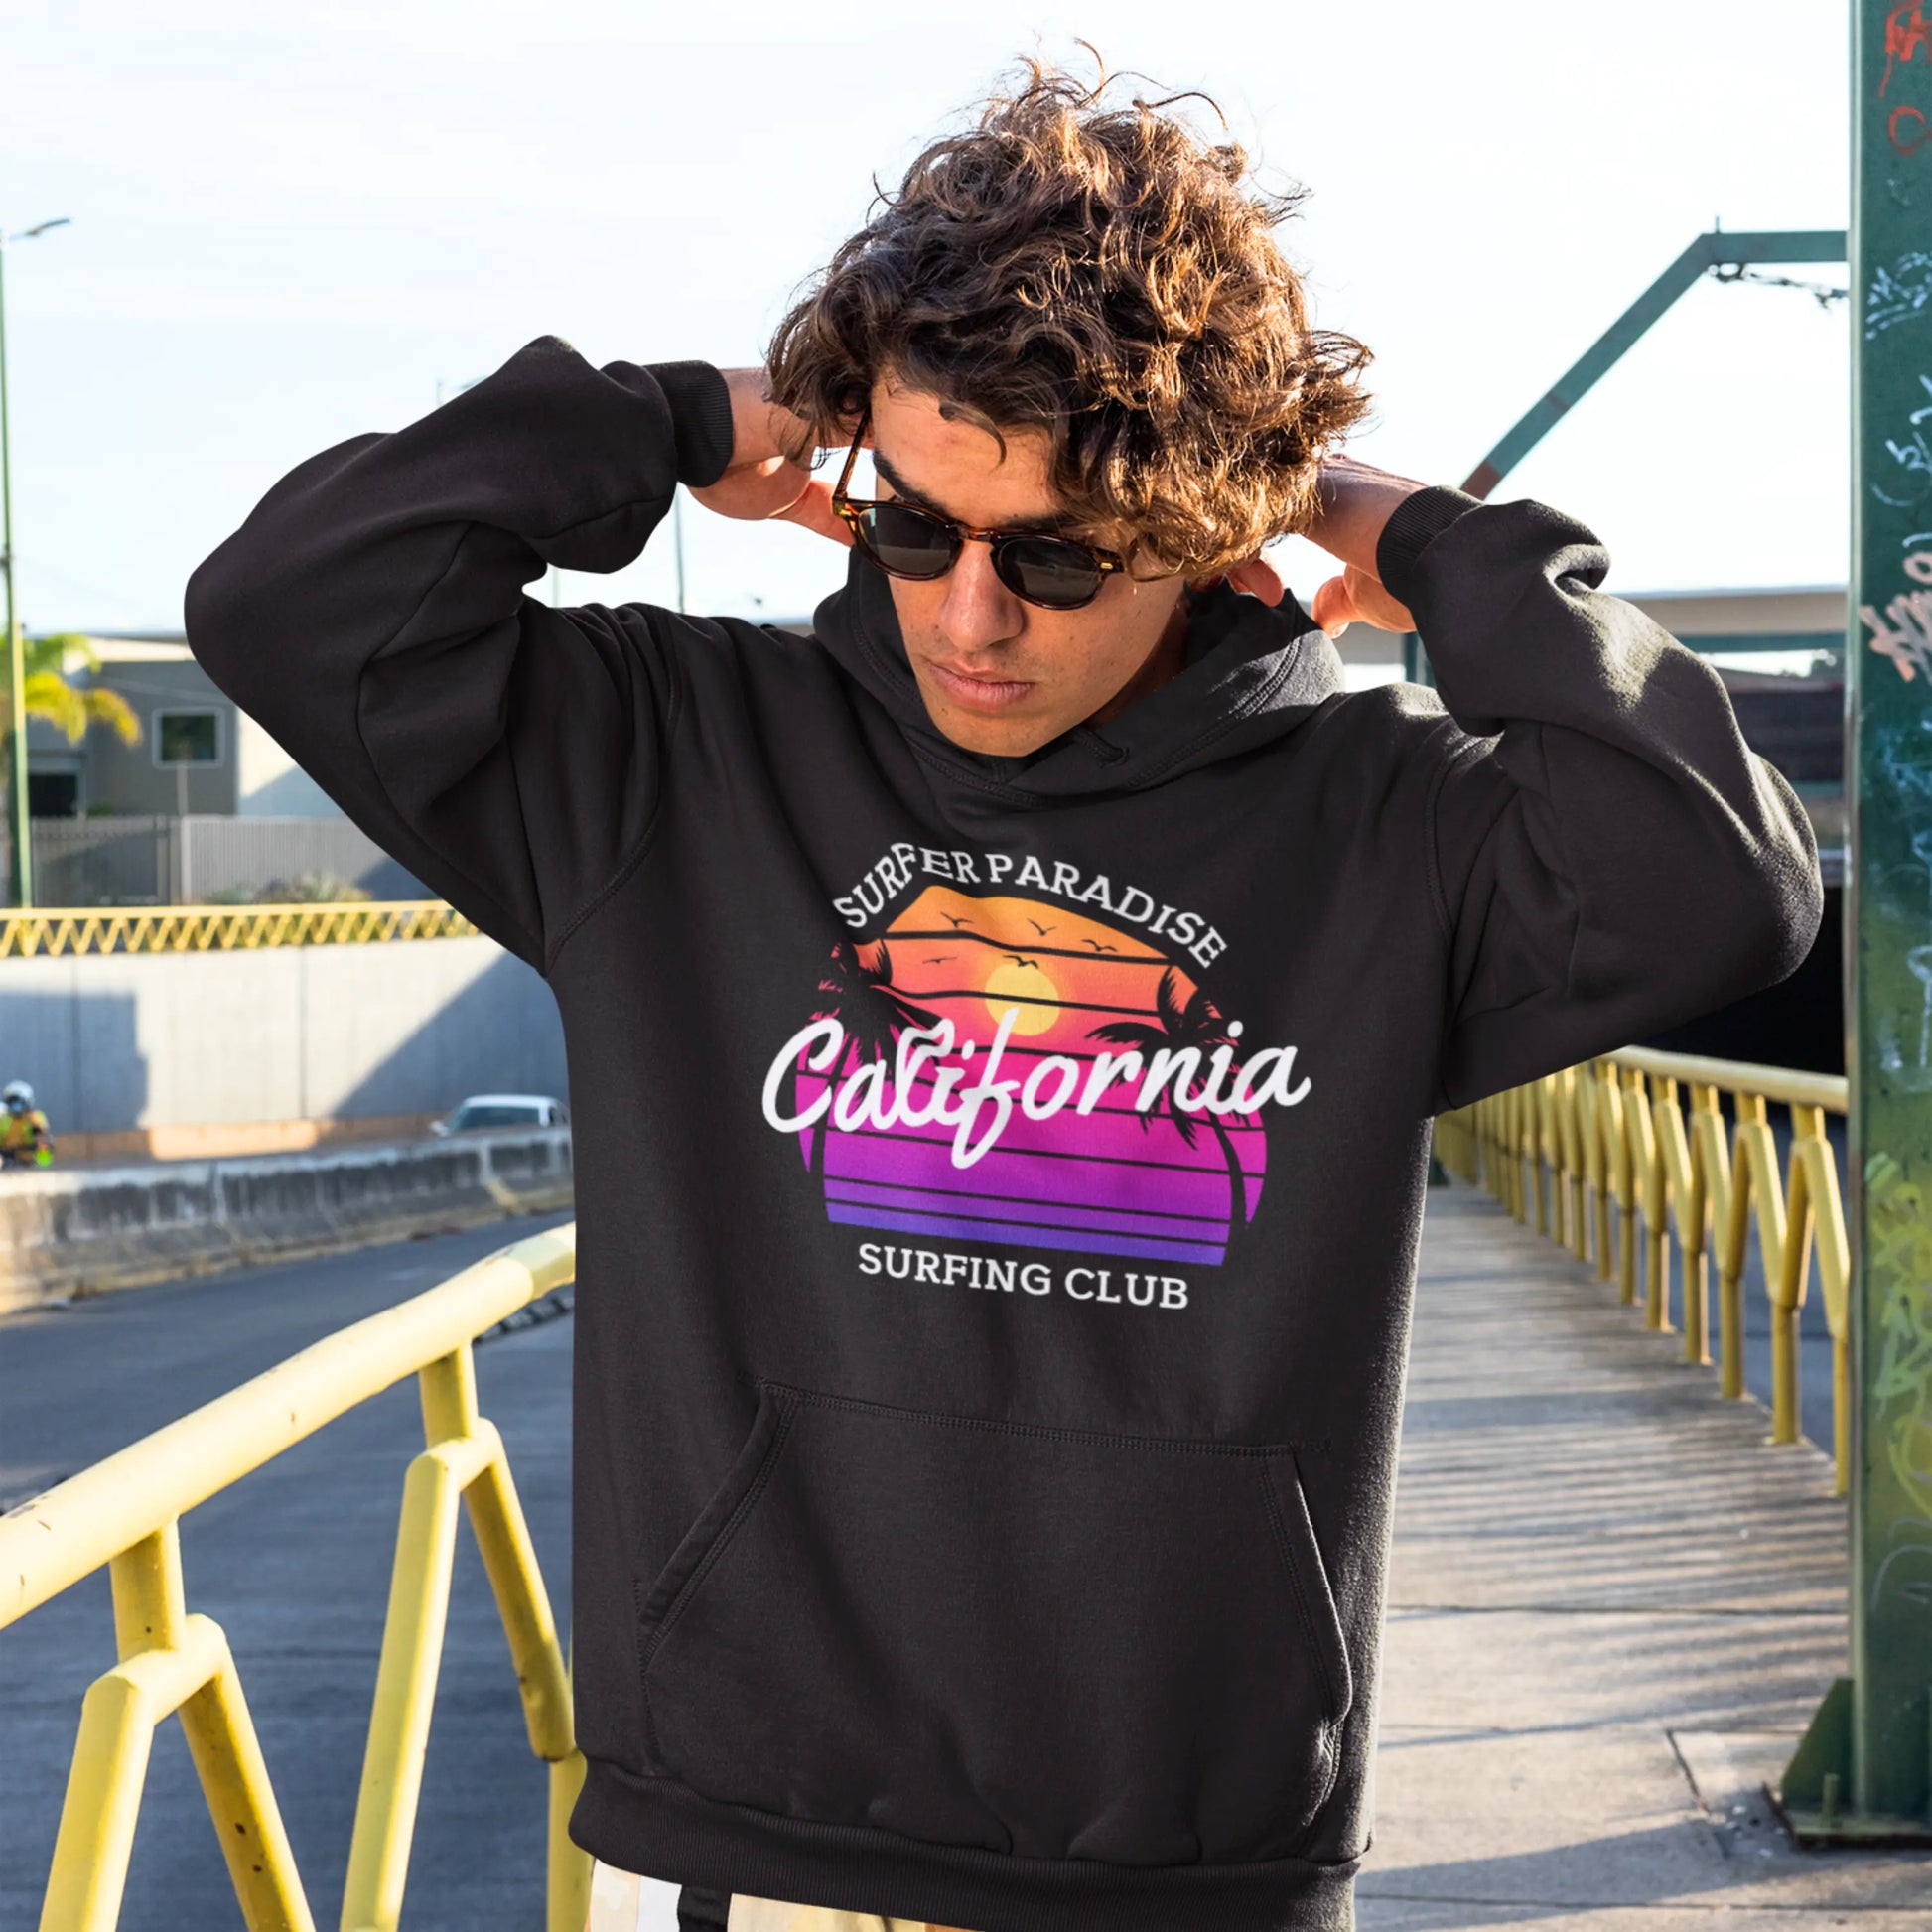 A young man with curly hair stands on a sunlit city bridge, casually adjusting his black bucket hat while wearing dark sunglasses. He's dressed in a black hoodie with a vibrant graphic on the front that reads 'Surfer Paradise California Surfing Club' in bold, gradient colors of pink, orange, and purple, evoking a sense of urban coolness and casual street style.